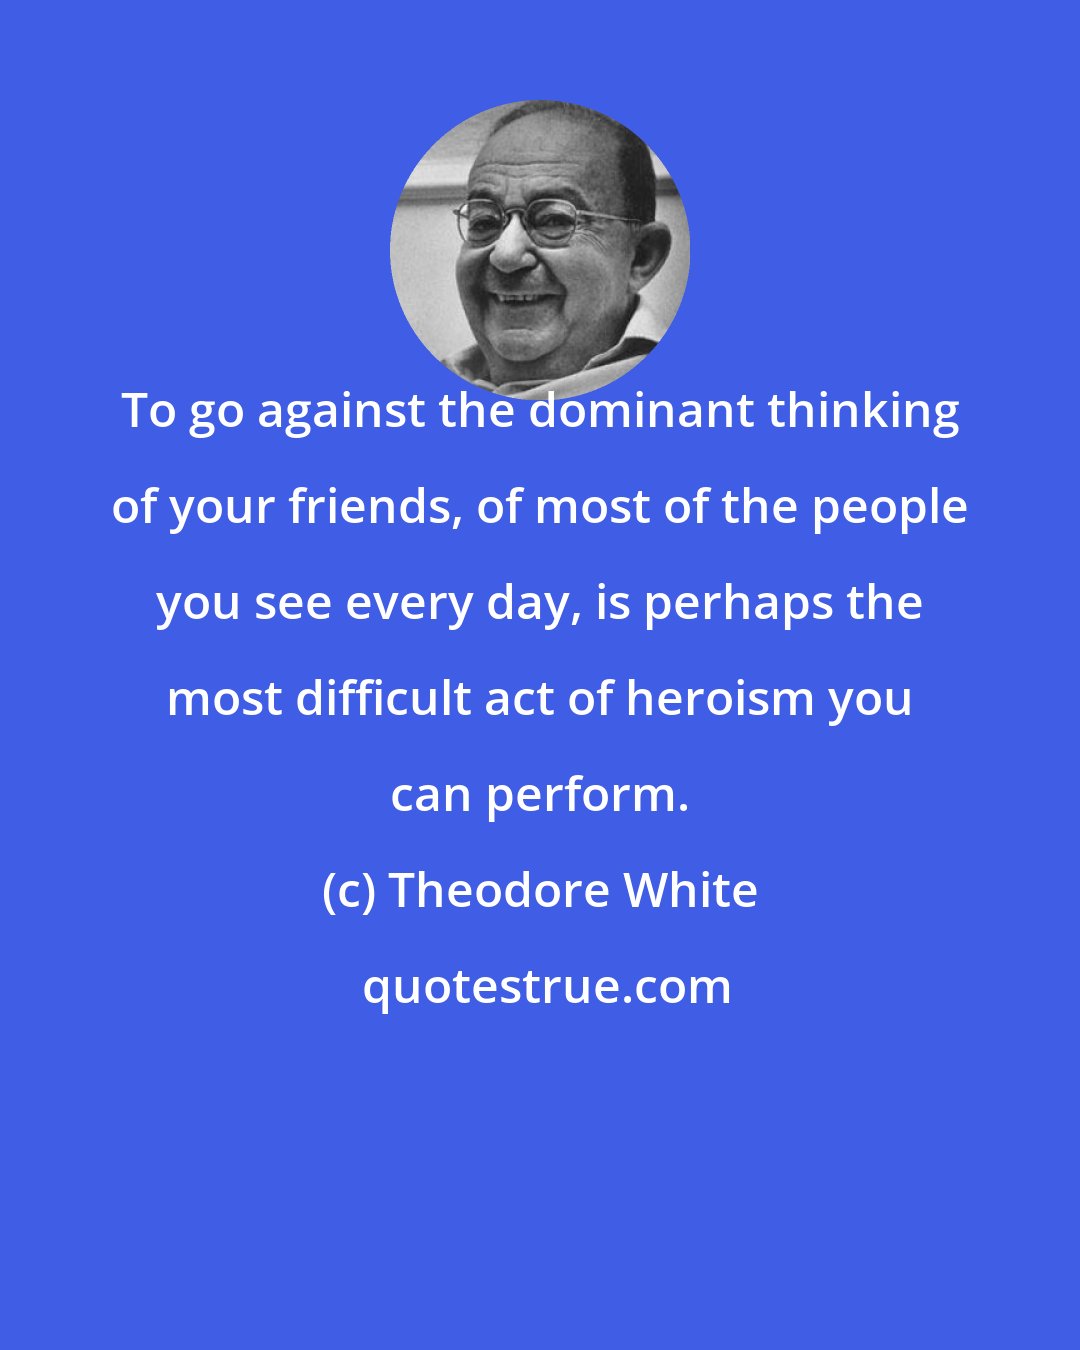 Theodore White: To go against the dominant thinking of your friends, of most of the people you see every day, is perhaps the most difficult act of heroism you can perform.